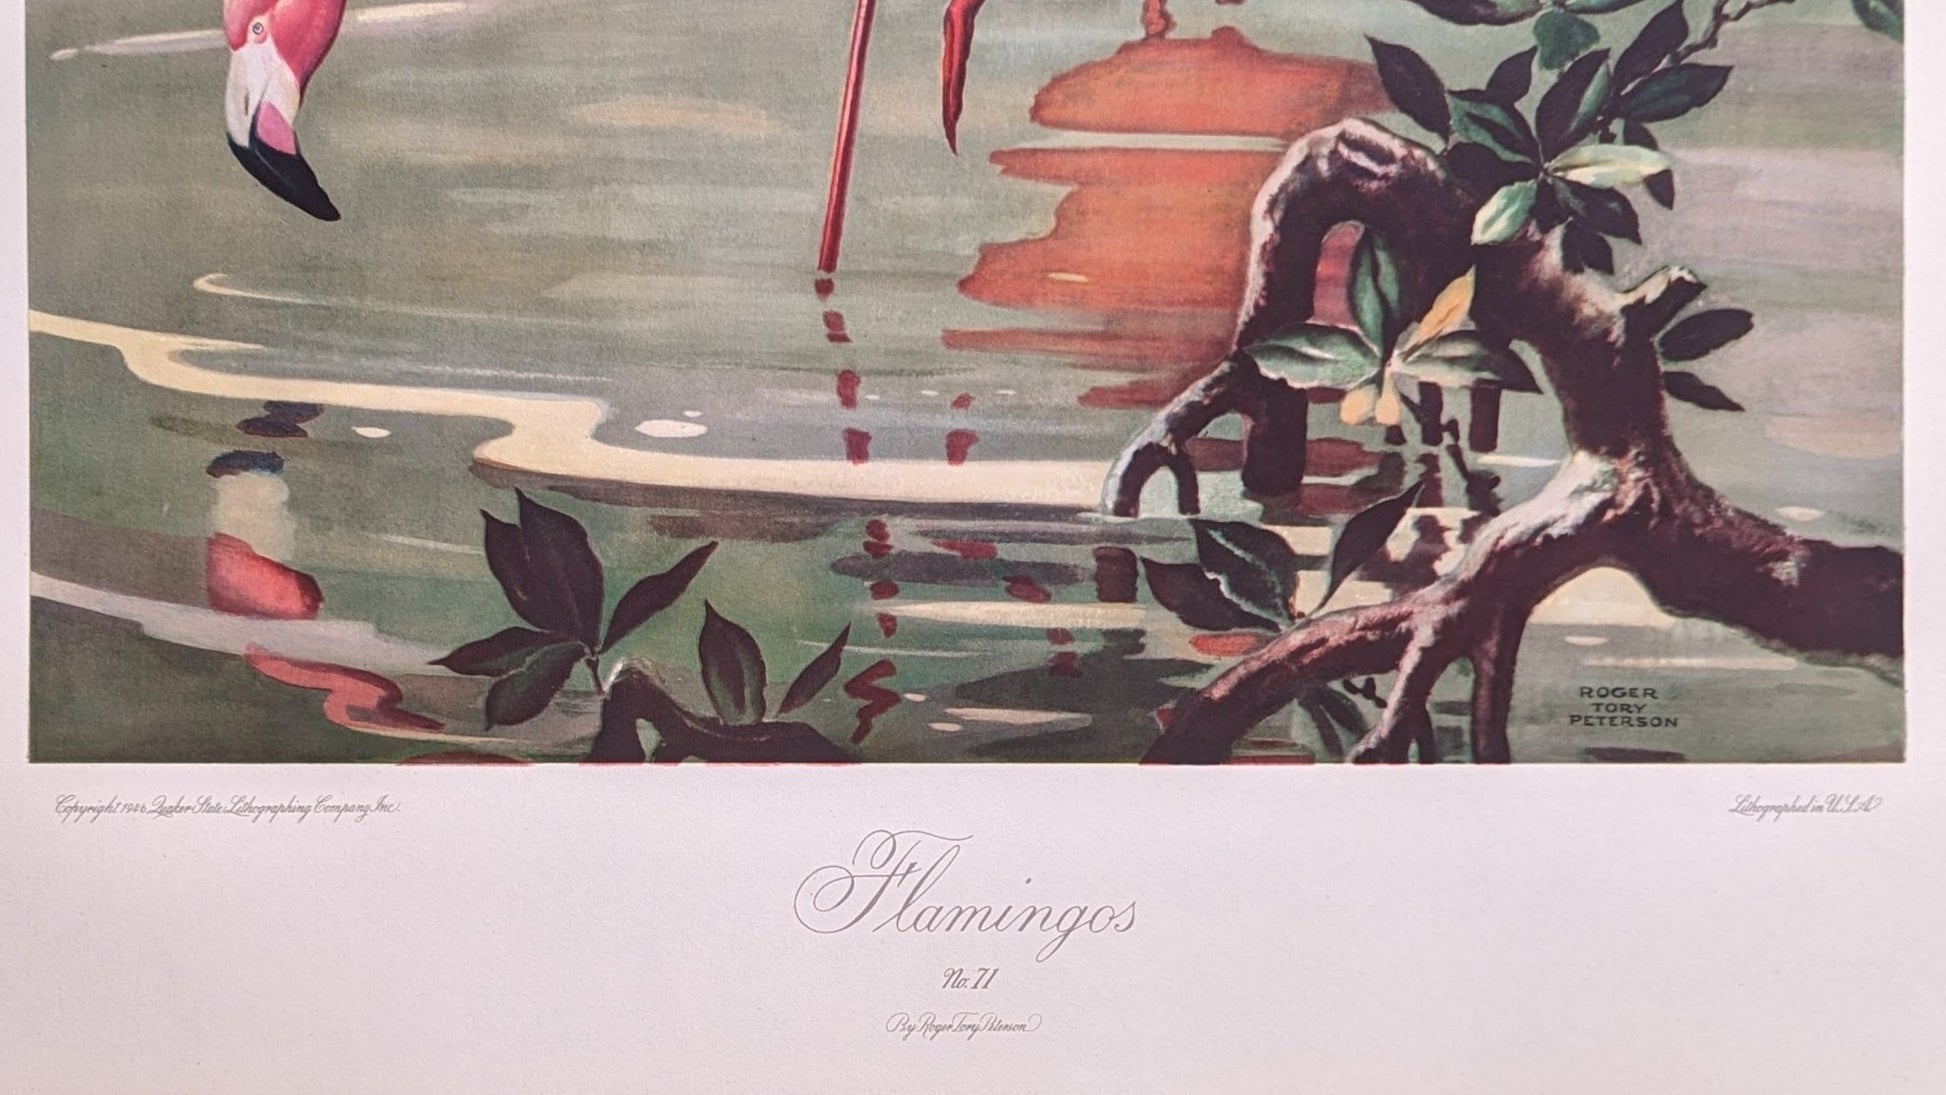 Flamingos by Roger Tory Peterson, mint condition vintage lithograph printed in the 1940s - Offset Lithograph - Pink Flamingos